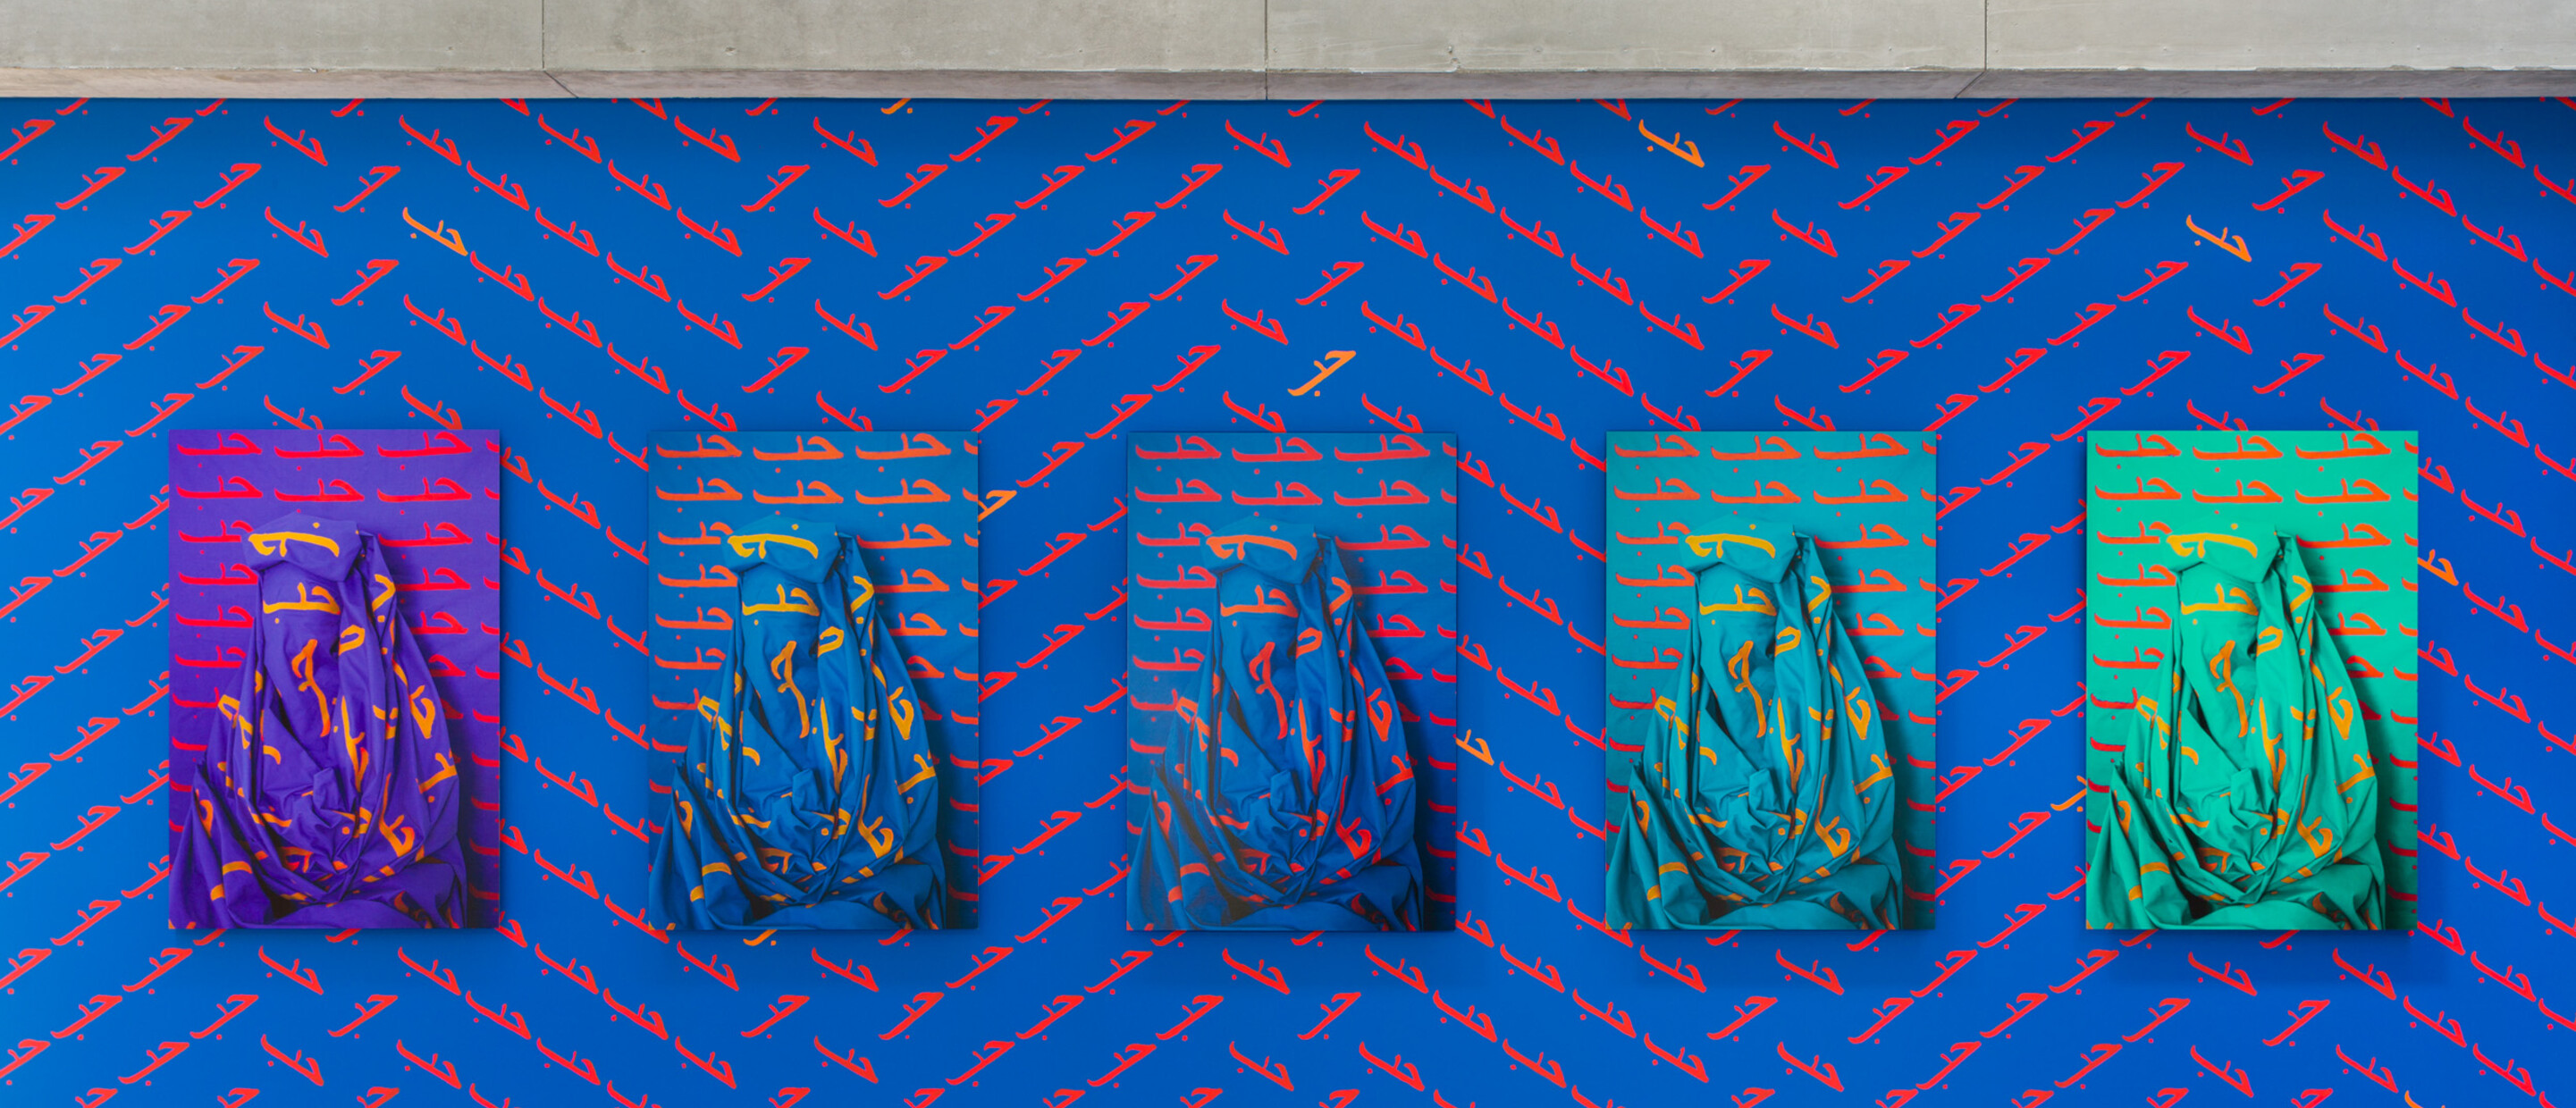 Installation view of Alia Ali's site-specific installation of Love with 5 photographs on blue wall with patterns of Love painted in Arabic